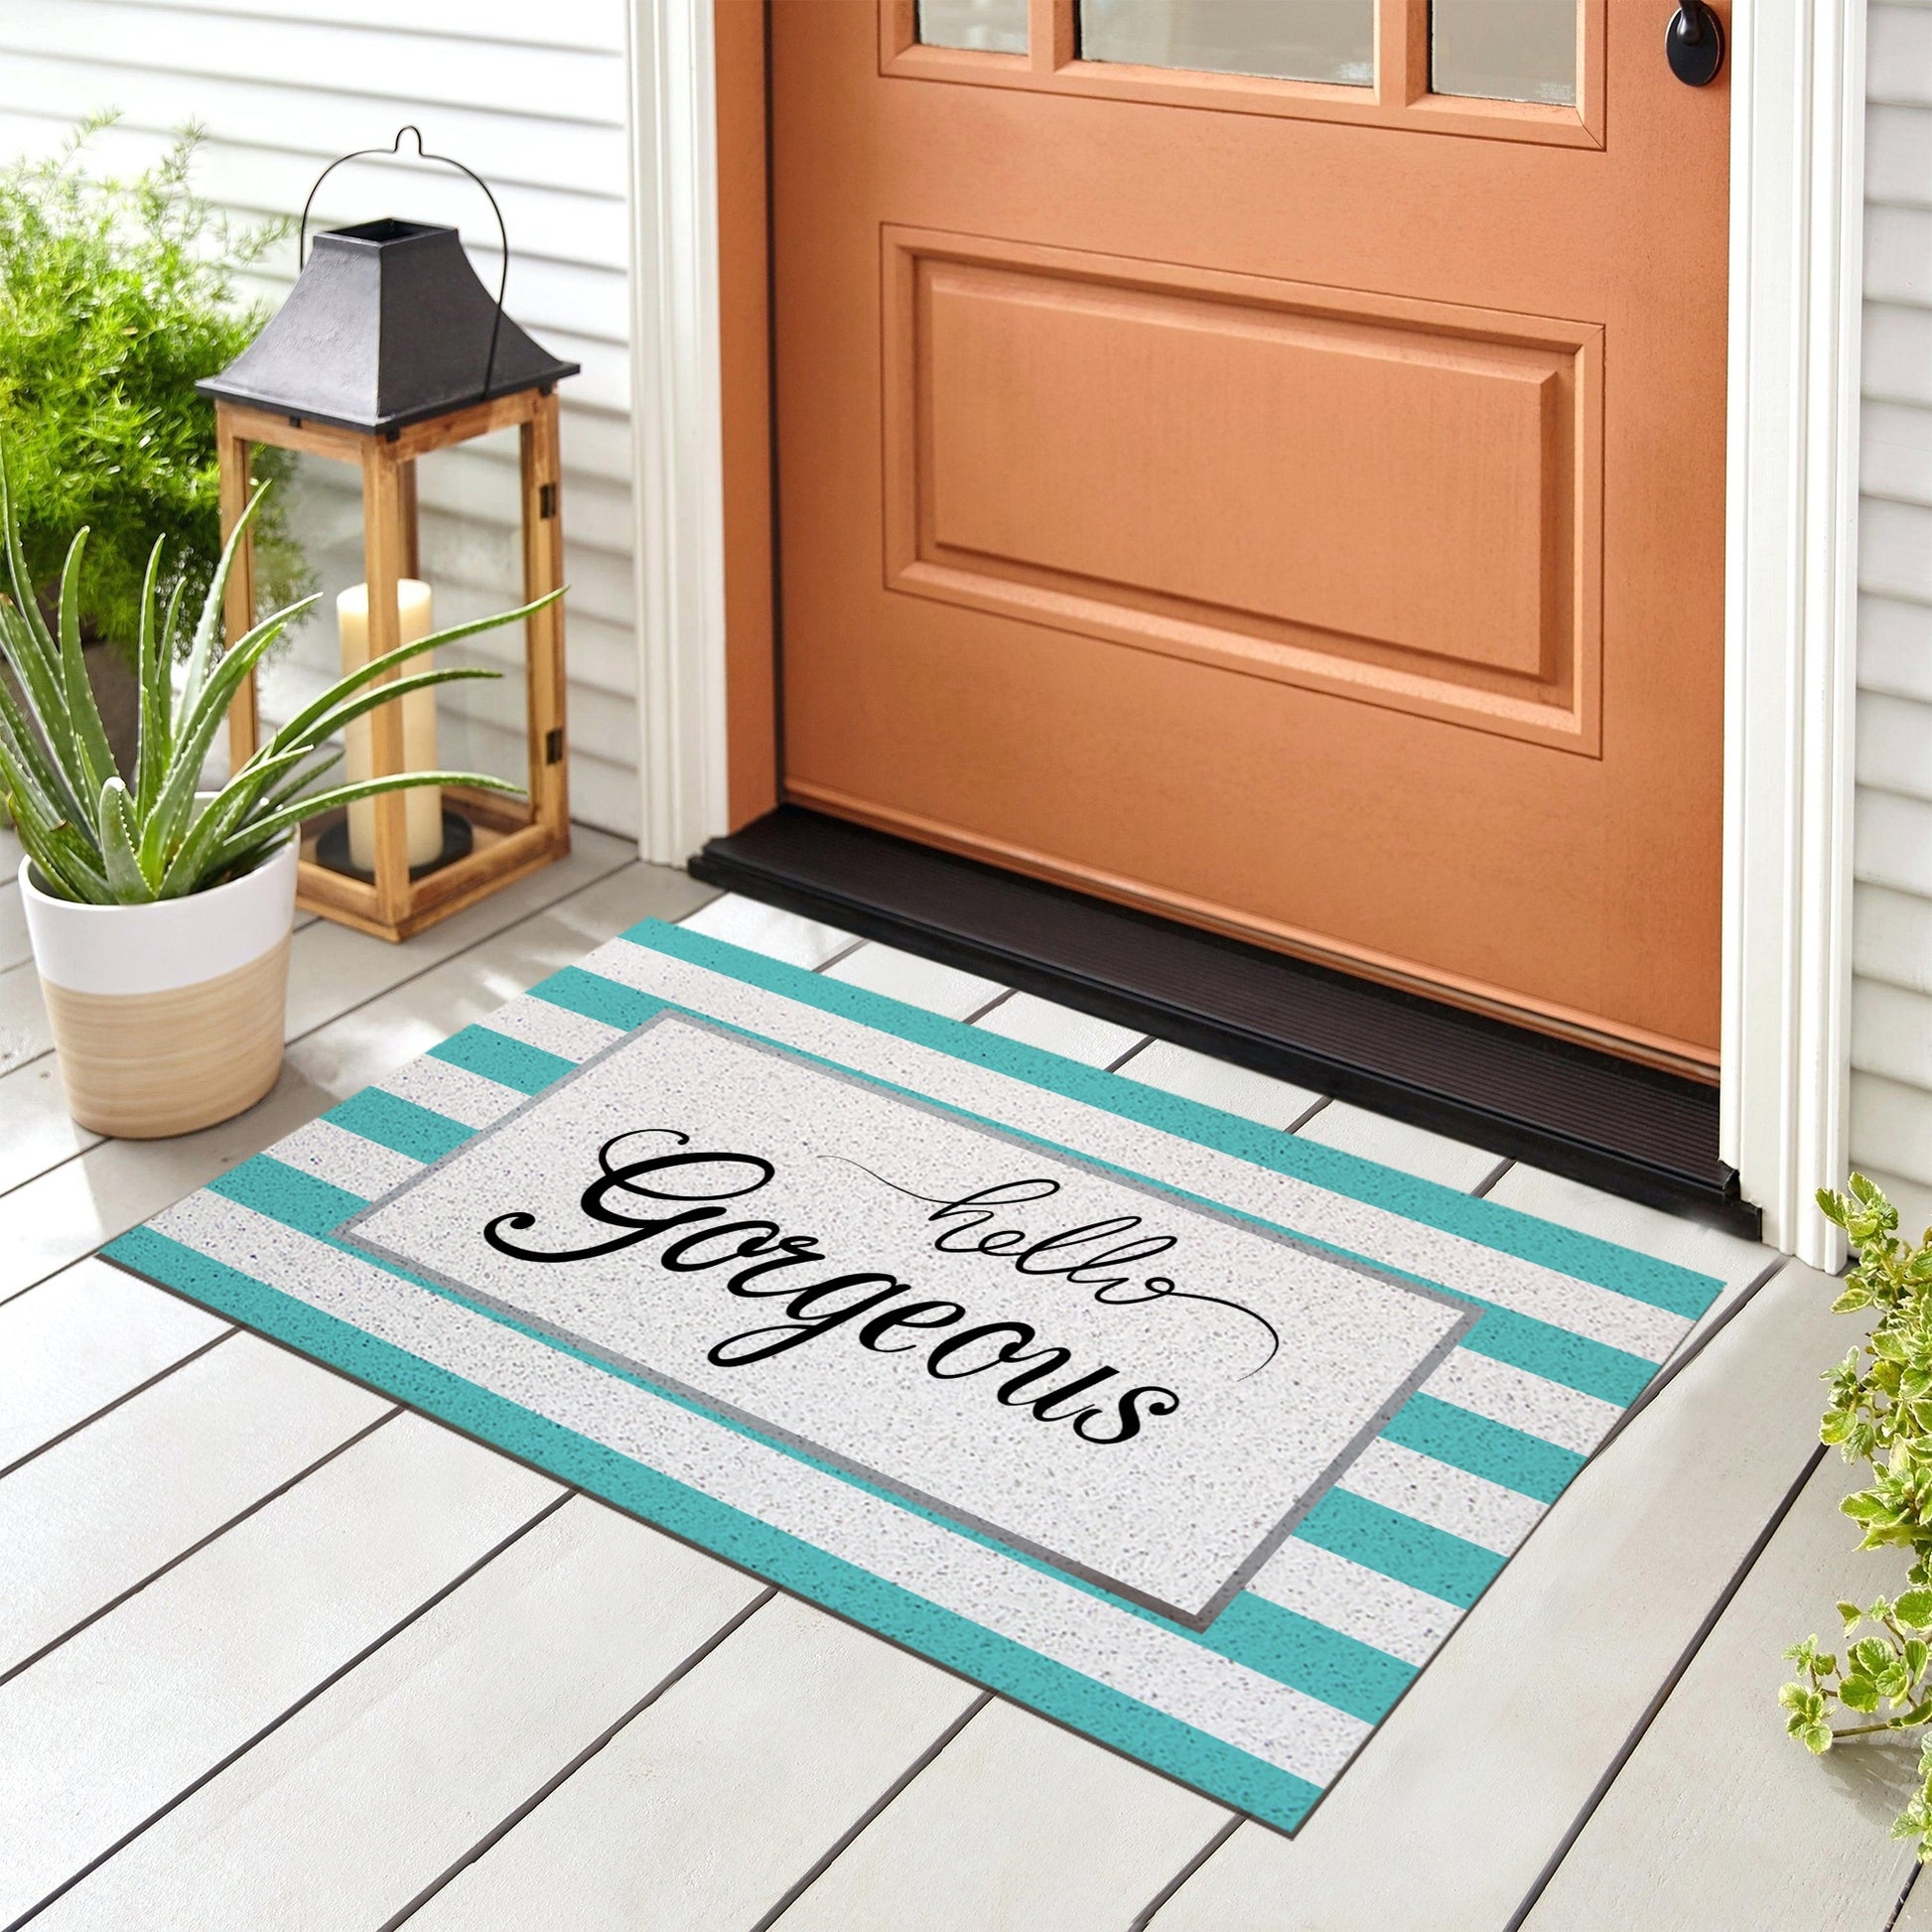 Feblilac Hello Gorgeous Blue Stripe Door Mat, Quotation Welcome Doormat, Anti Skid PVC Coil Outdoor Mats, Front Mat for Home, Washable Entryway Doormat - Feblilac® Mat